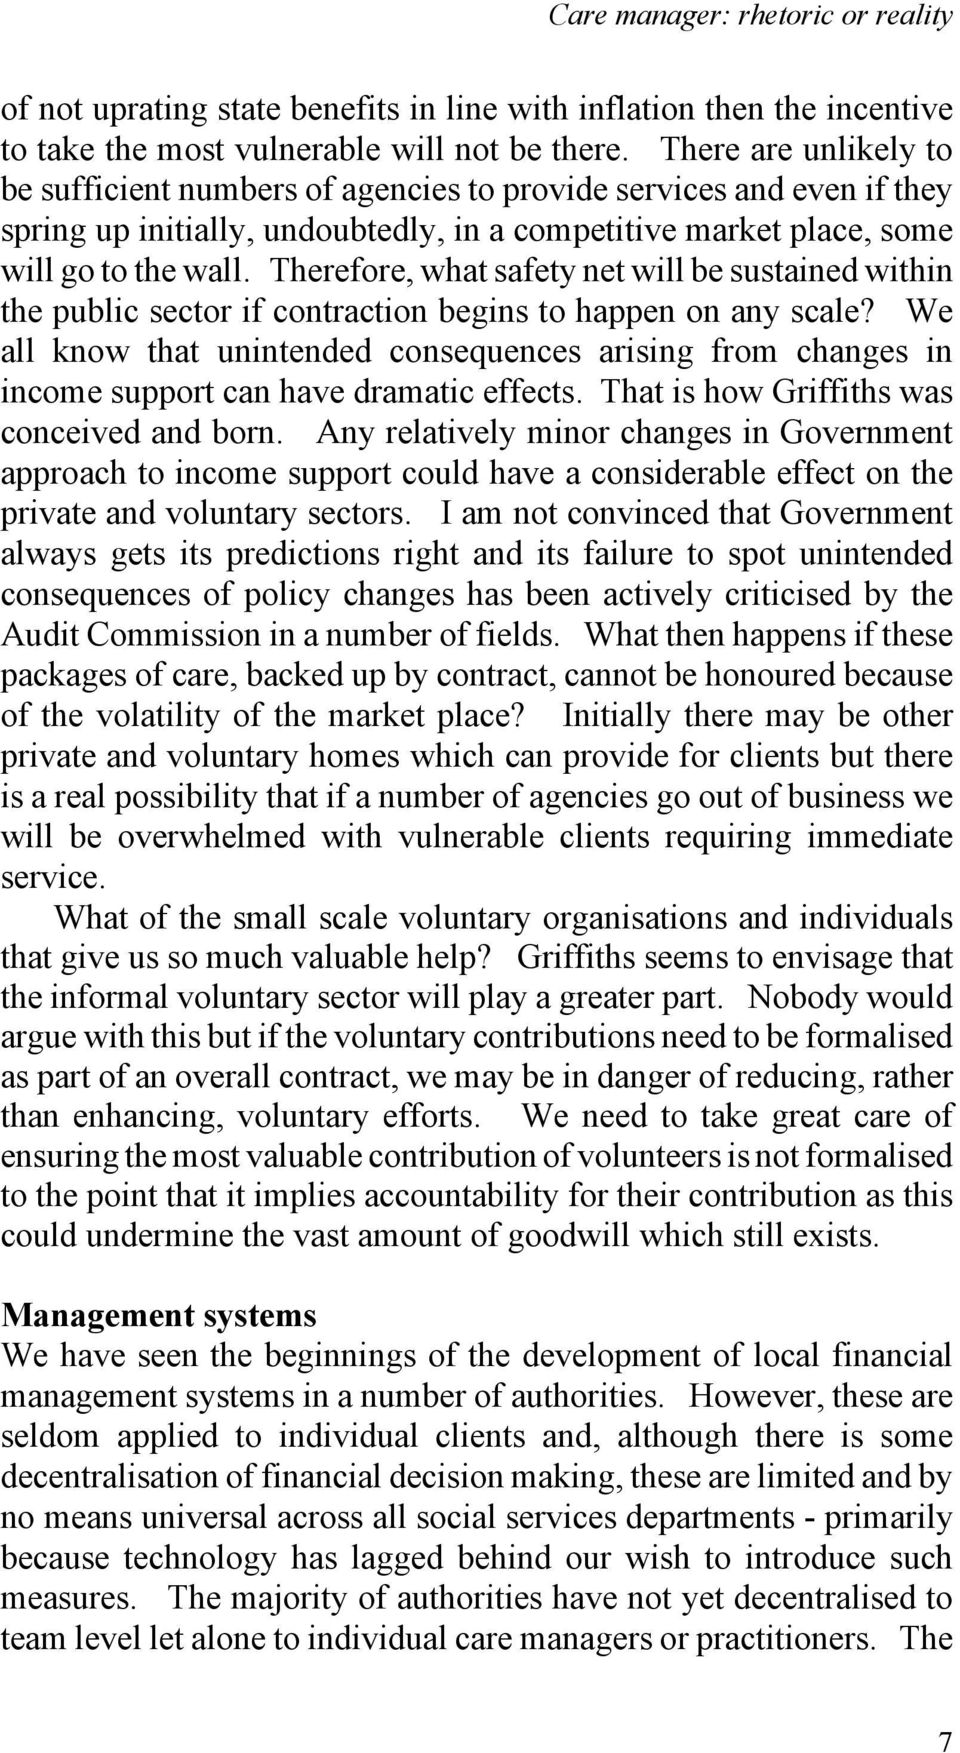 Therefore, what safety net will be sustained within the public sector if contraction begins to happen on any scale?